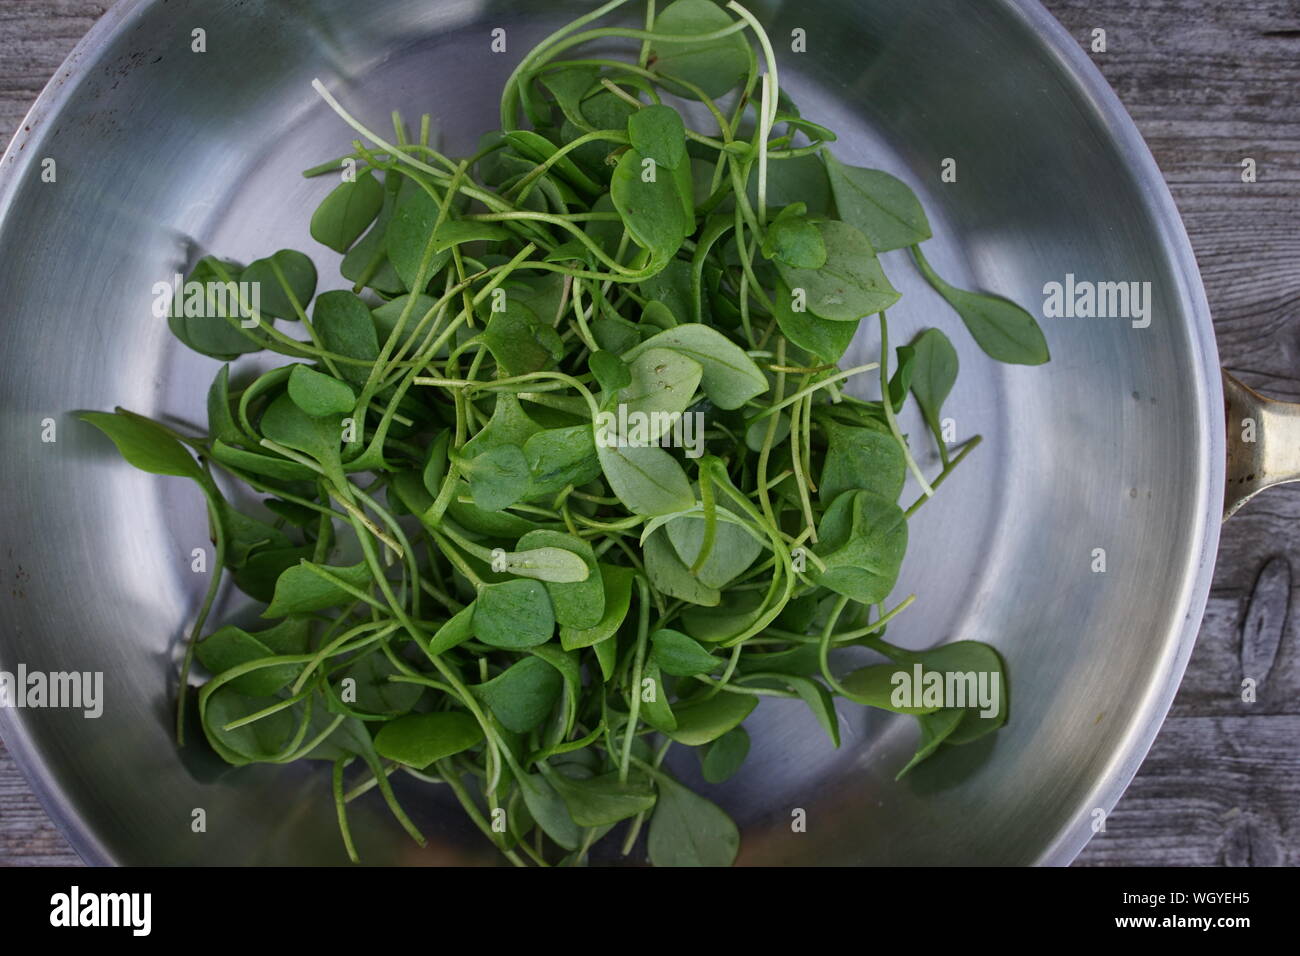 Directly Above Shot Of Leaf Vegetable In Container On Table Stock Photo